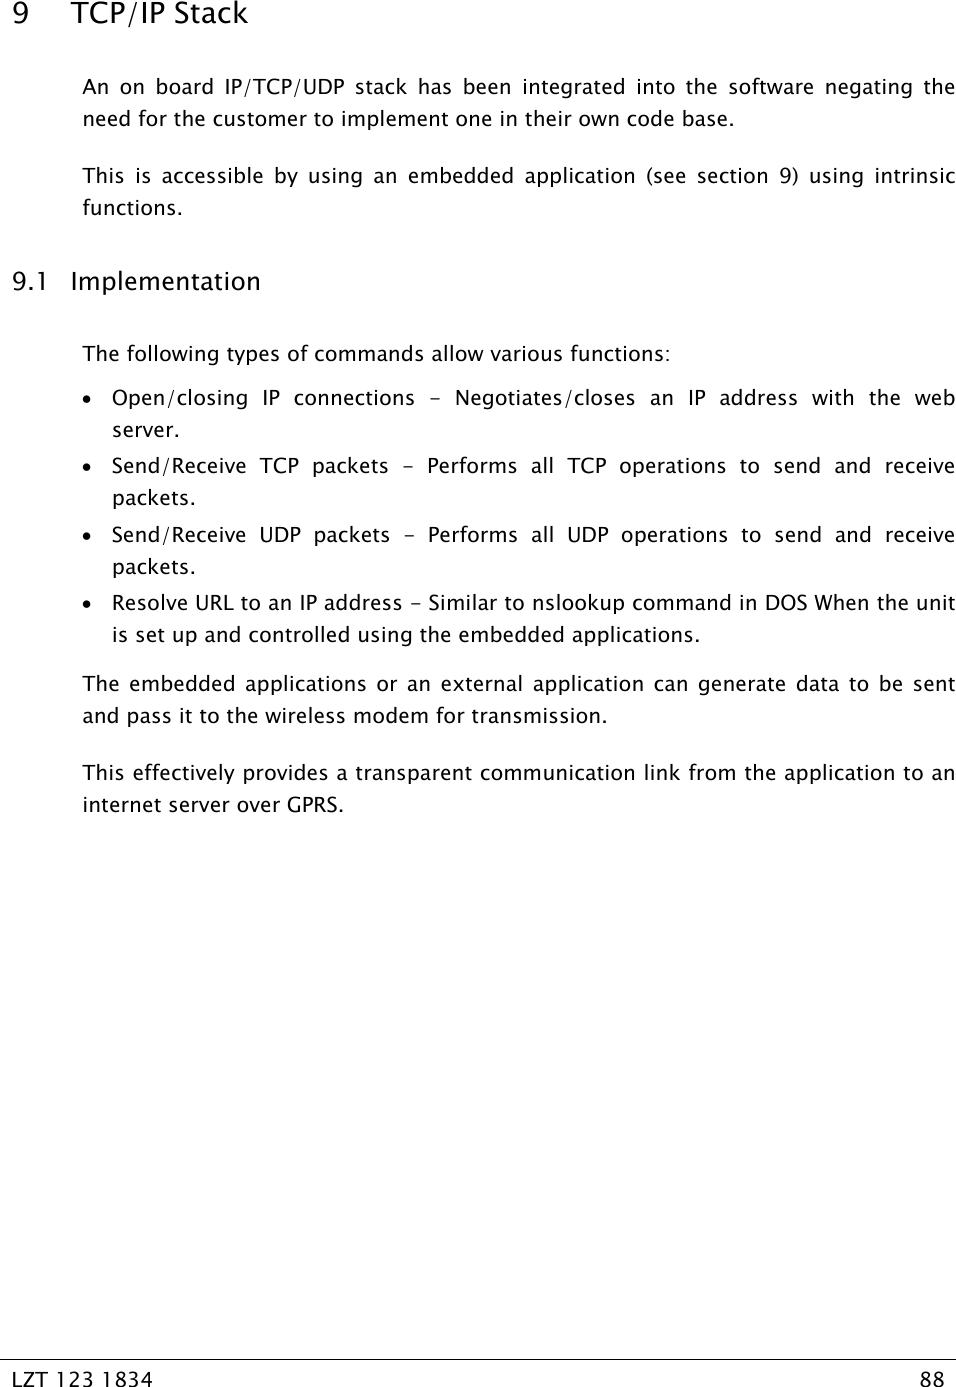   LZT 123 1834  88   9 TCP/IP Stack An on board IP/TCP/UDP stack has been integrated into the software negating the need for the customer to implement one in their own code base. This is accessible by using an embedded application (see section 9) using intrinsic functions. 9.1 Implementation The following types of commands allow various functions: • Open/closing IP connections - Negotiates/closes an IP address with the web server. • Send/Receive TCP packets - Performs all TCP operations to send and receive packets. • Send/Receive UDP packets - Performs all UDP operations to send and receive packets. • Resolve URL to an IP address - Similar to nslookup command in DOS When the unit is set up and controlled using the embedded applications. The embedded applications or an external application can generate data to be sent and pass it to the wireless modem for transmission.  This effectively provides a transparent communication link from the application to an internet server over GPRS. 